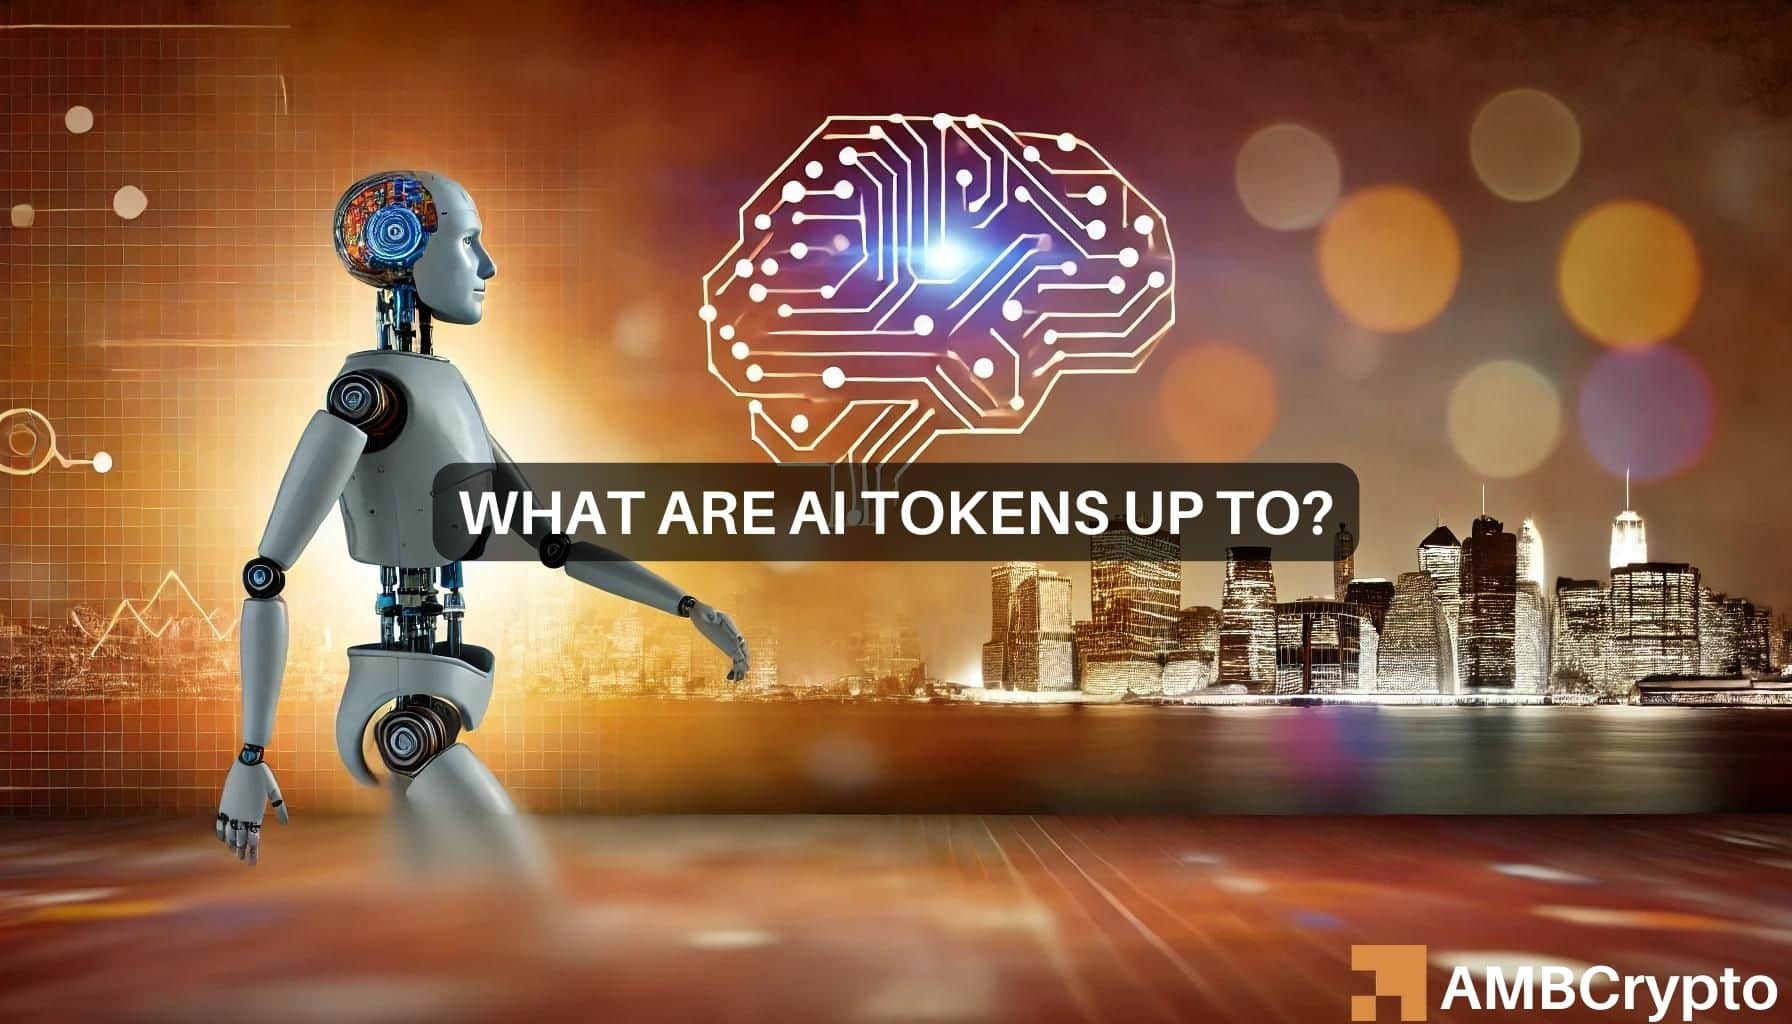 ASI merger begins: So why are AI tokens FET, AGIX, OCEAN plummeting today?